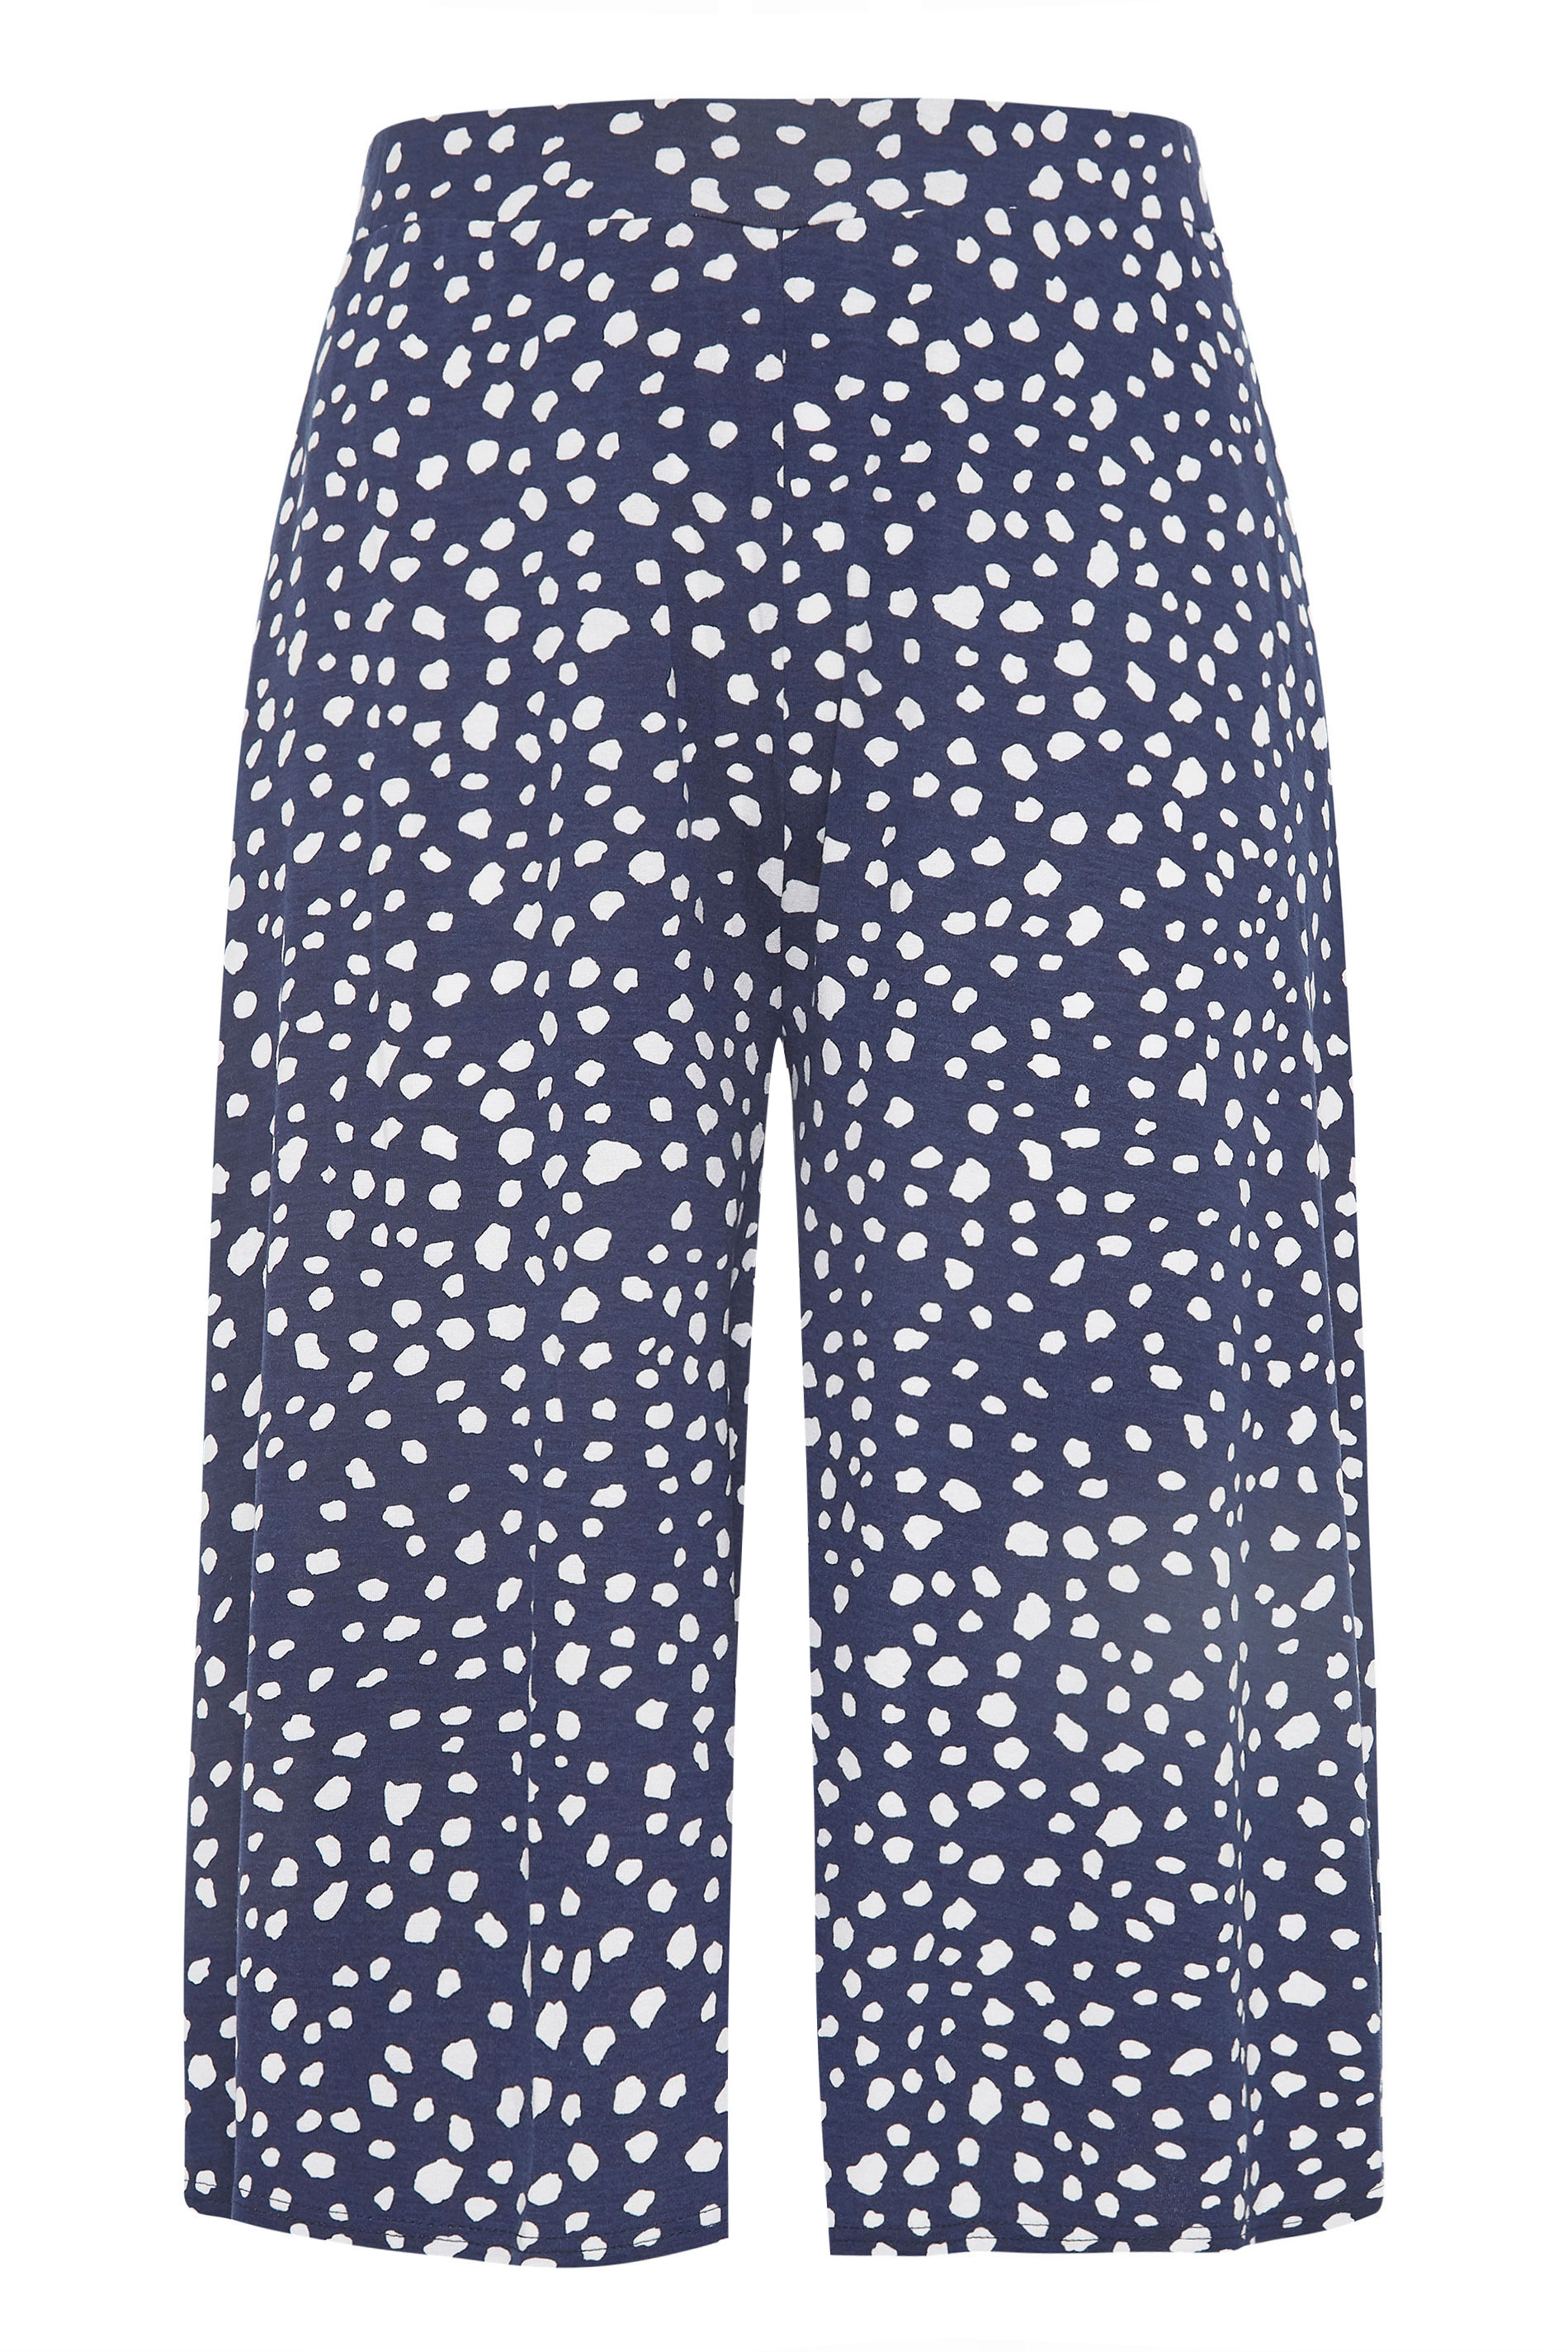 Navy Animal Spot Print Culottes | Yours Clothing